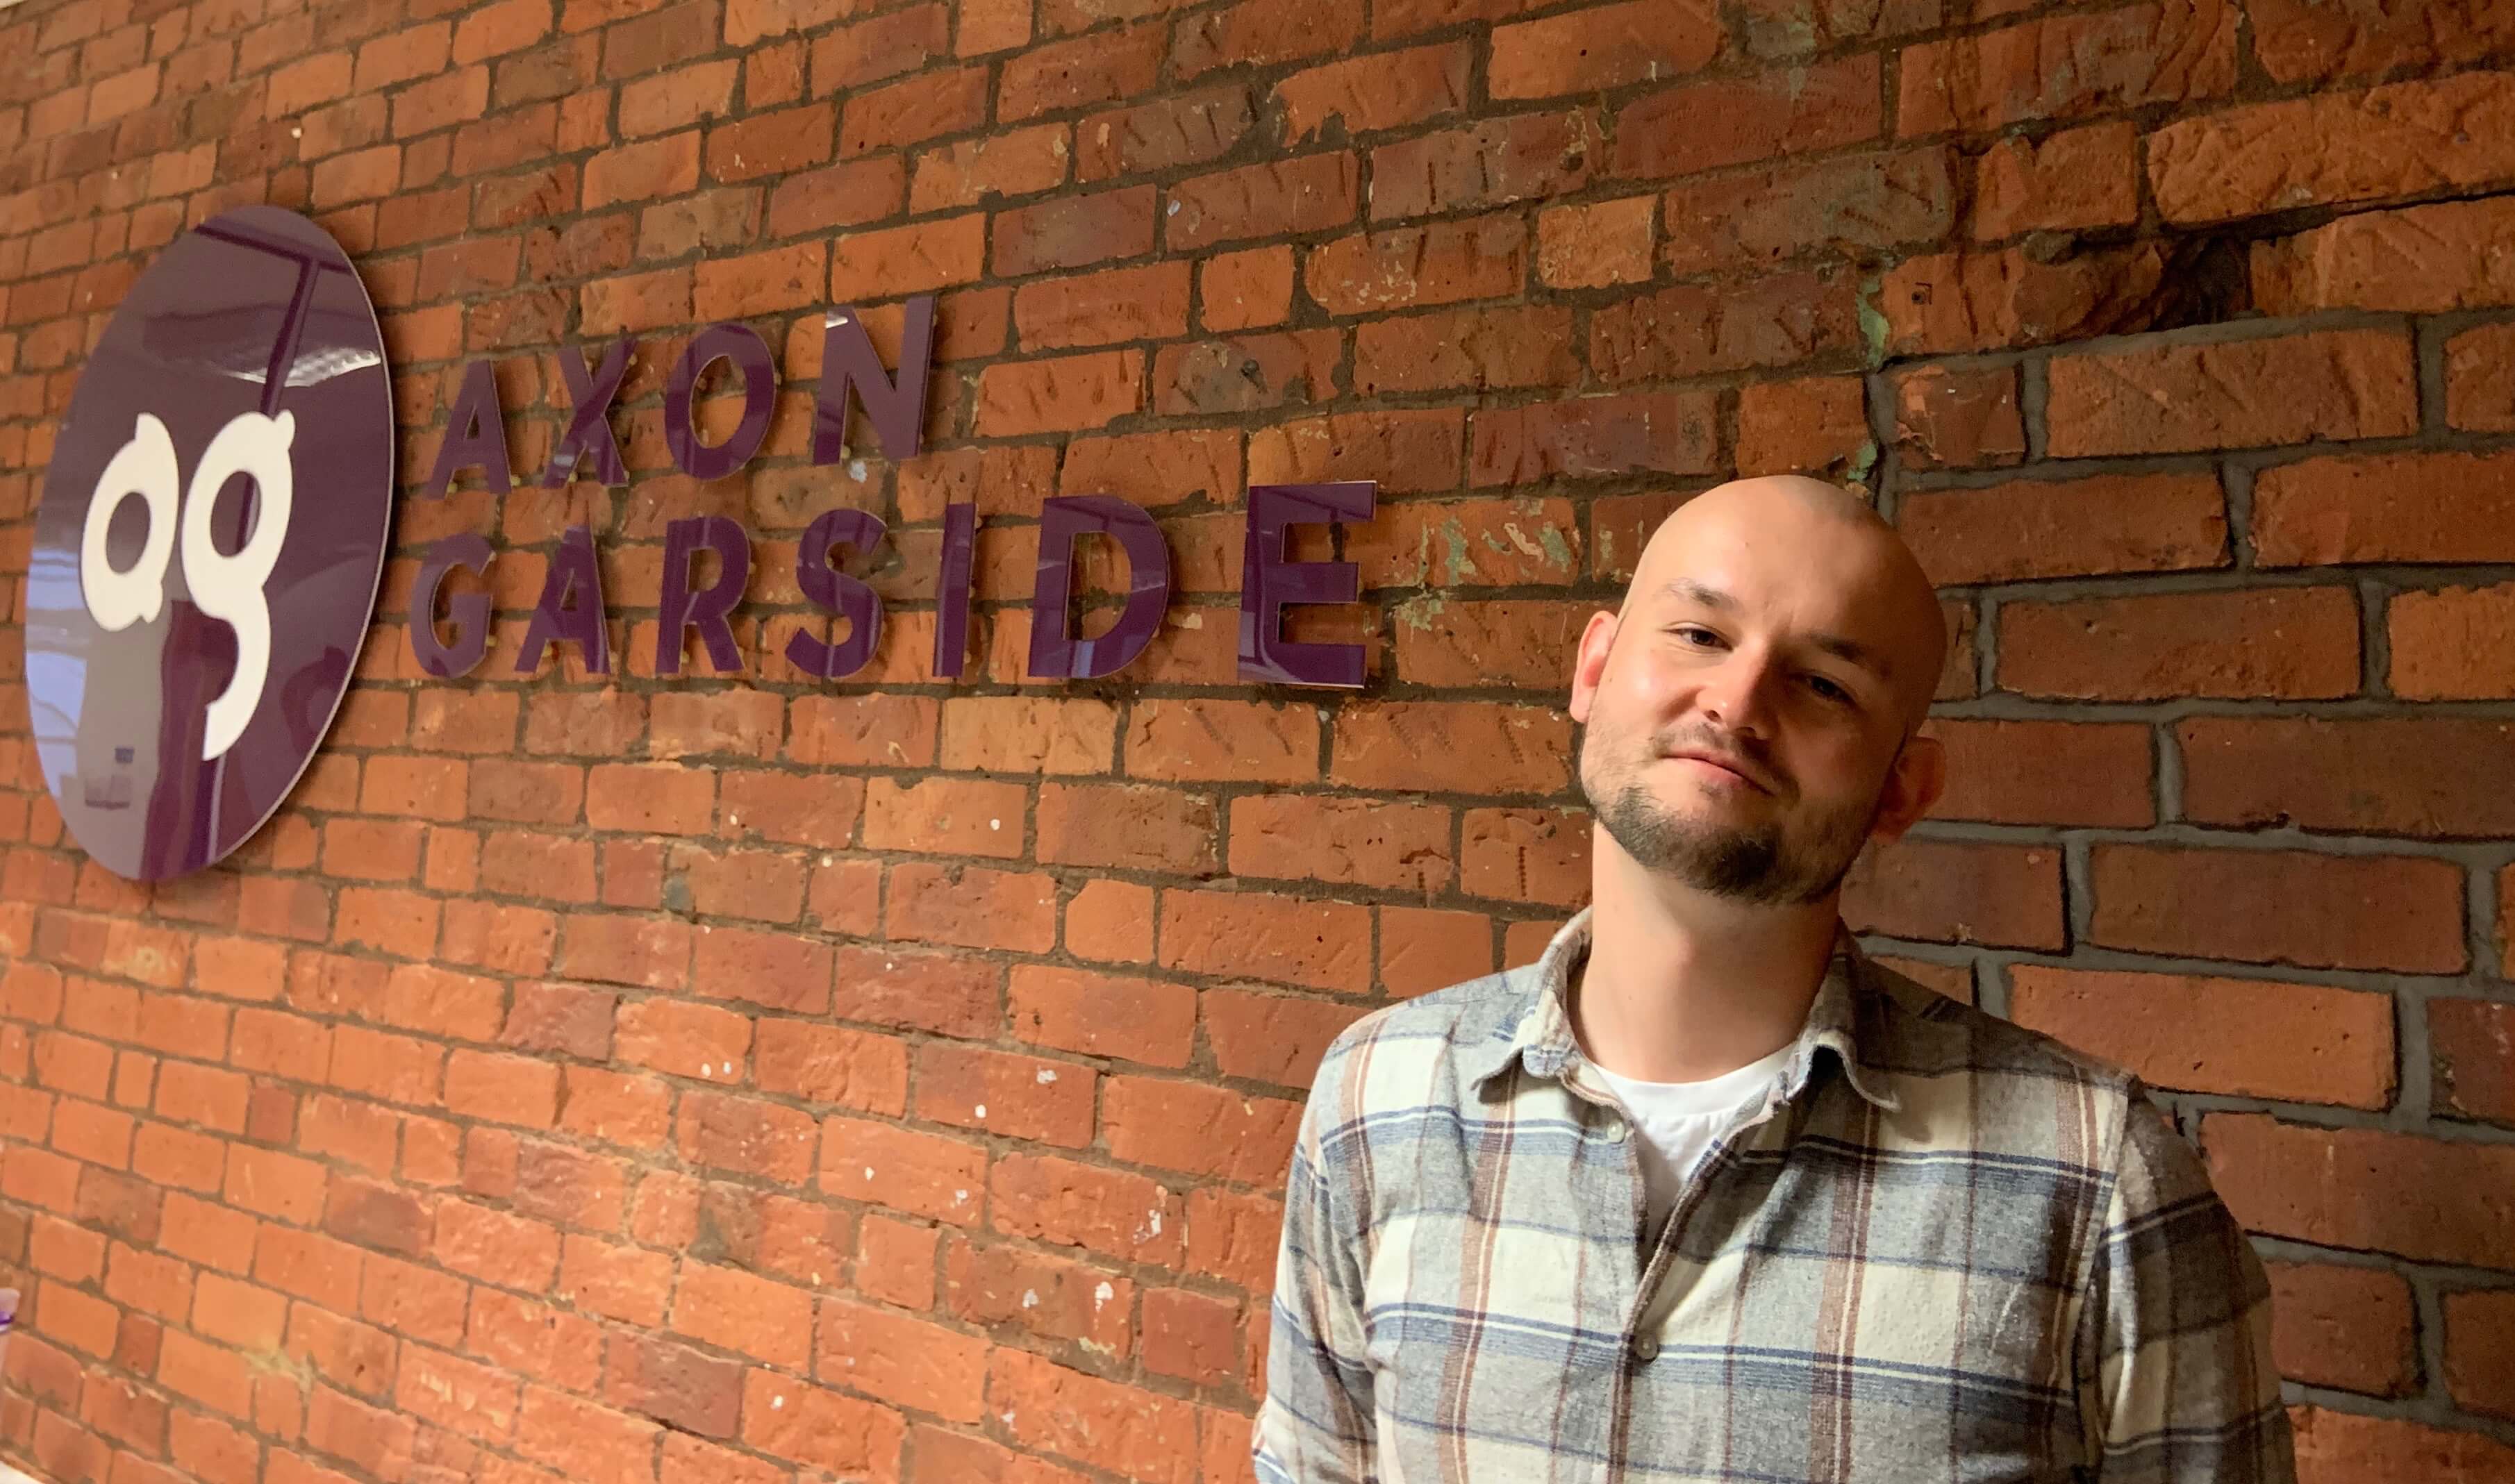 Axon Garside boost Engineering and Industrial expertise with new hire